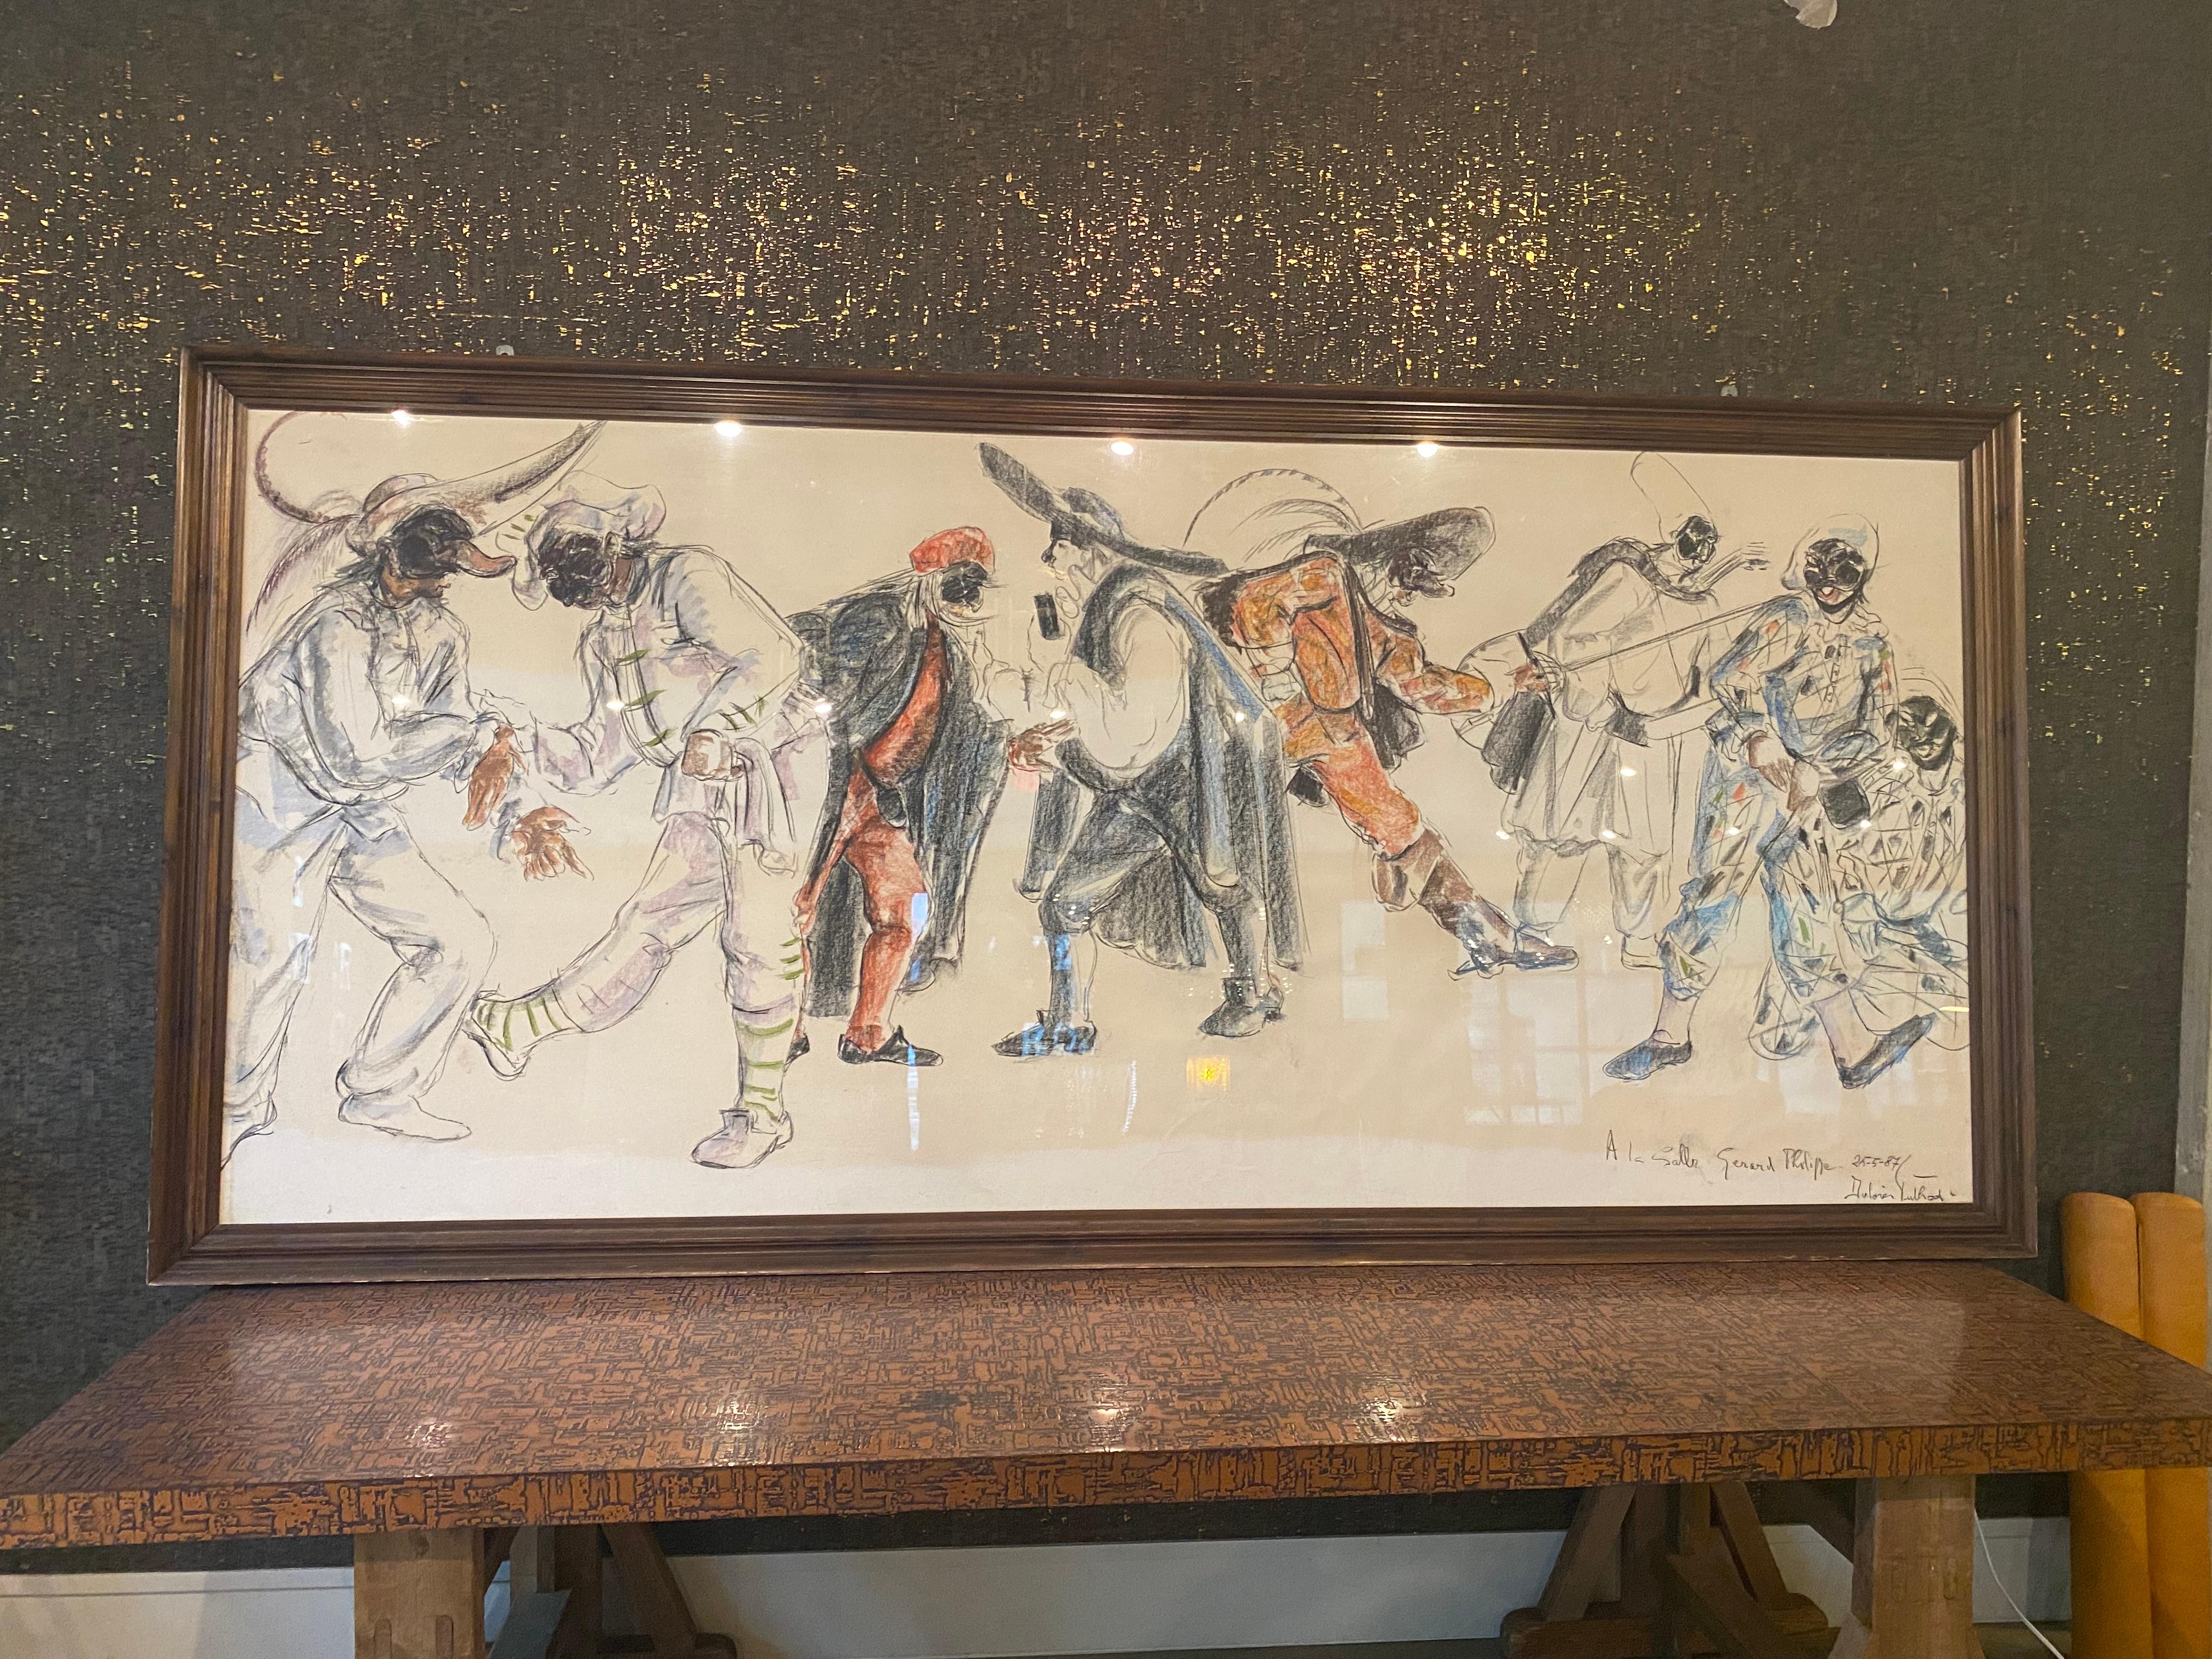 A grand drawing in charcoal and pastel on paper, mounted on board, in original frame, by the famed artist, Dolores Puthold.  A frequent painter of the performing arts, and labeled with La Salle Gerard Philipe, this is likely a preparatory work for a